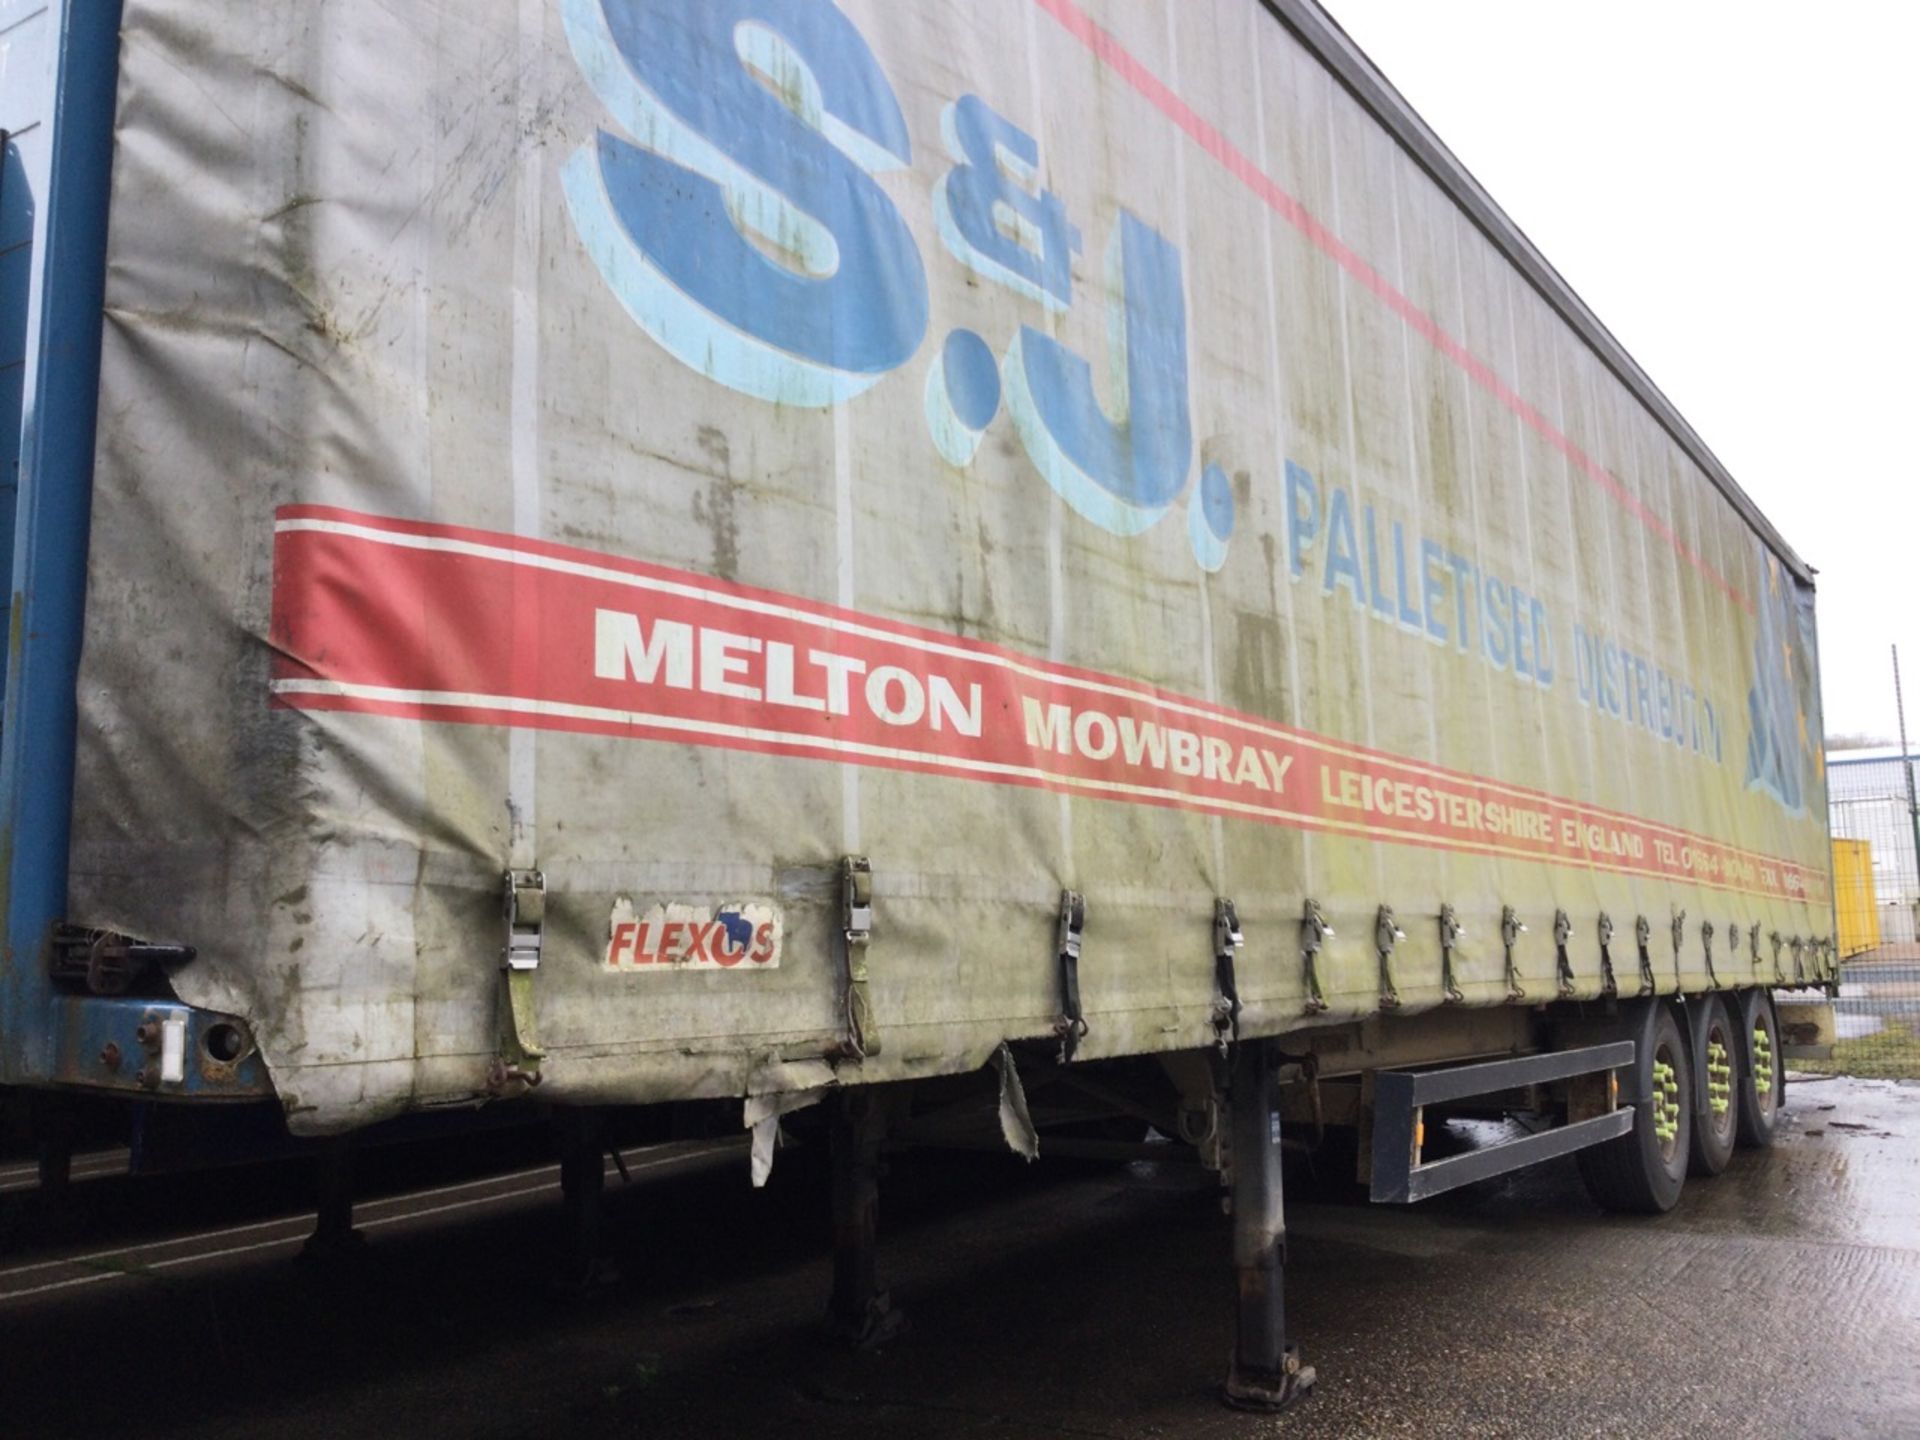 Schmitz Tri-Axle 13.9m Curtainside Trailer Mot Expired , serial number C164011 , year 2004. Not - Image 2 of 4